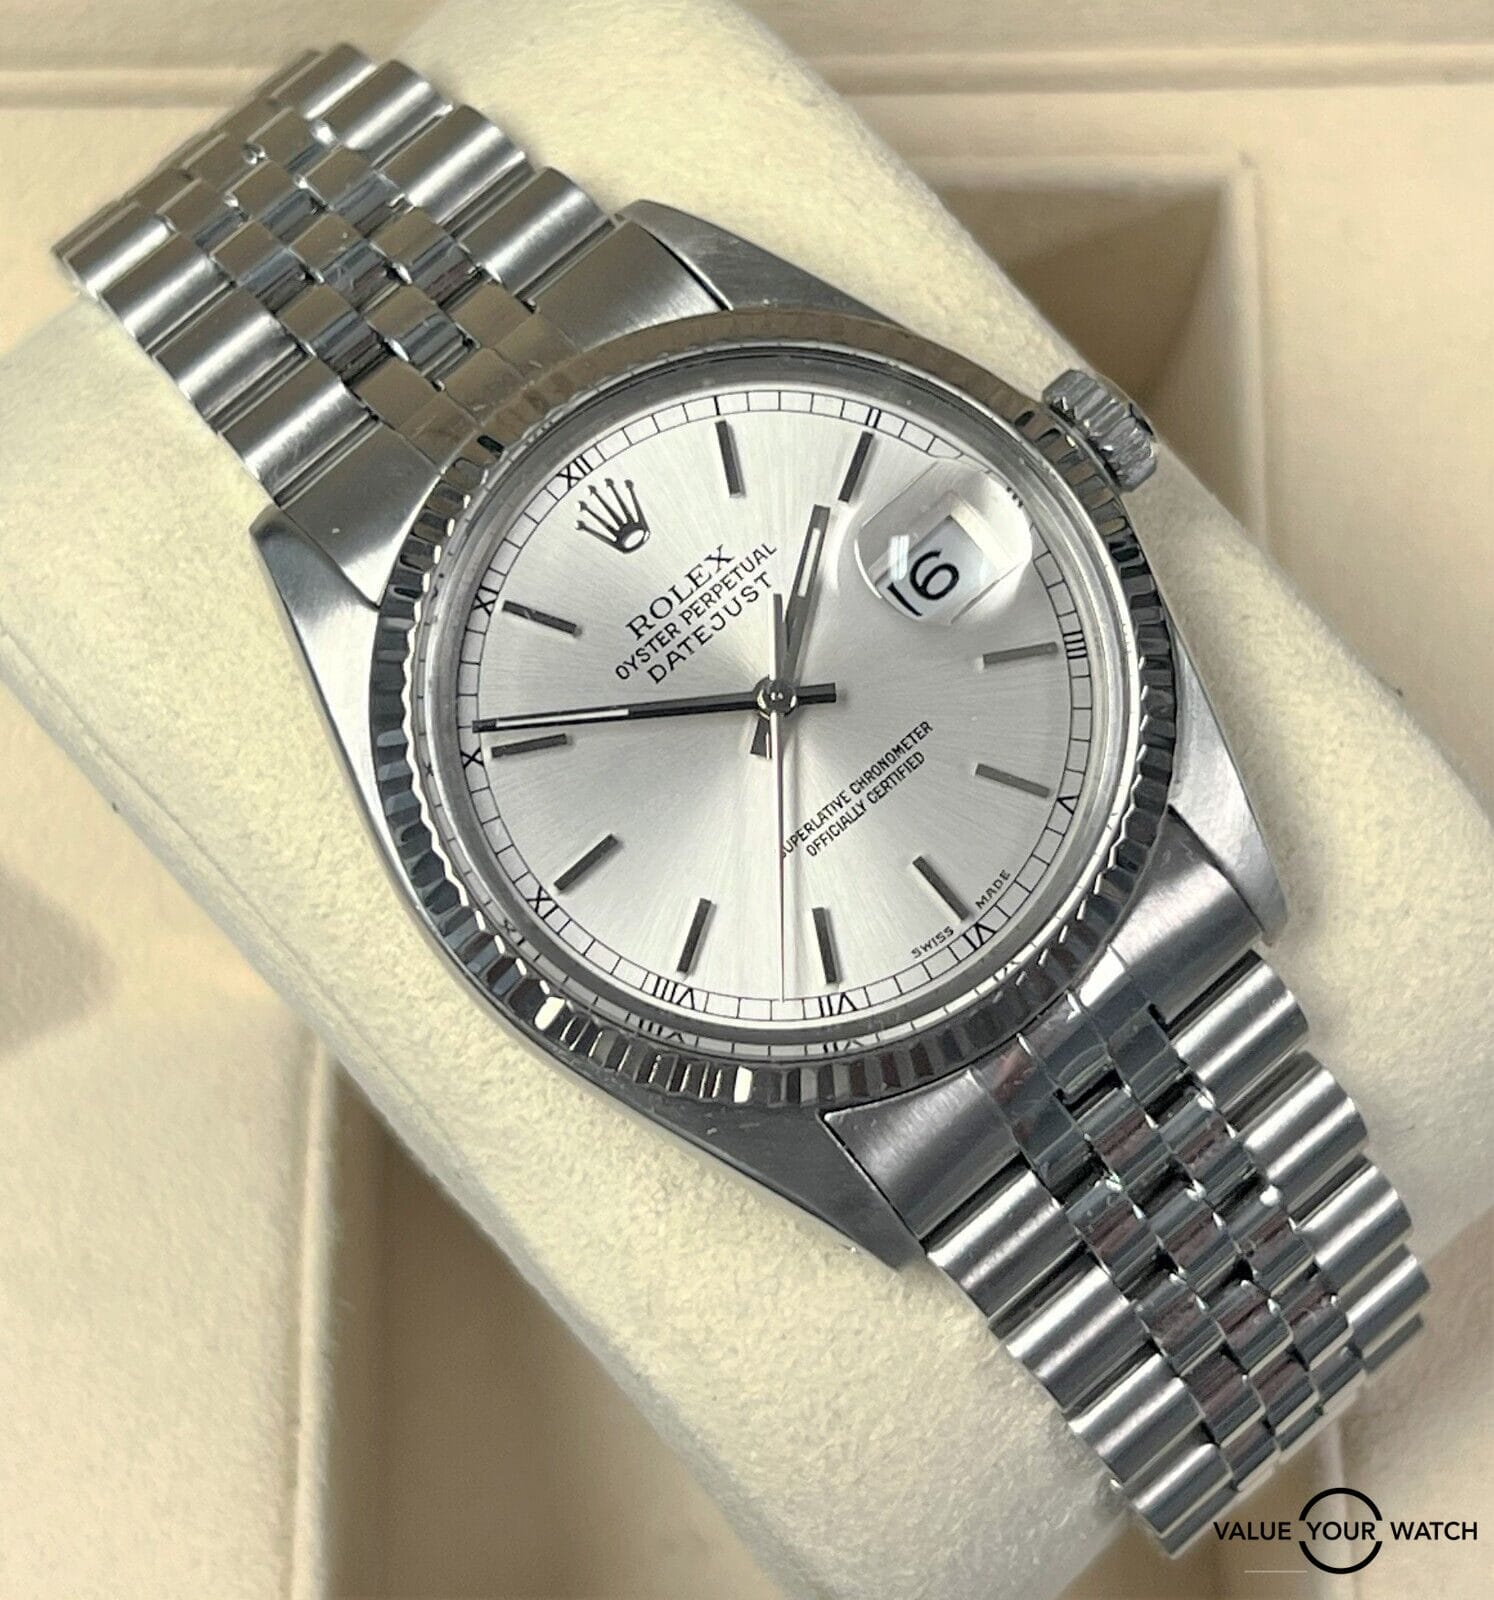 Rolex Datejust 16014 36mm Silver Dial 18K White Gold Bezel & Stainless Steel!